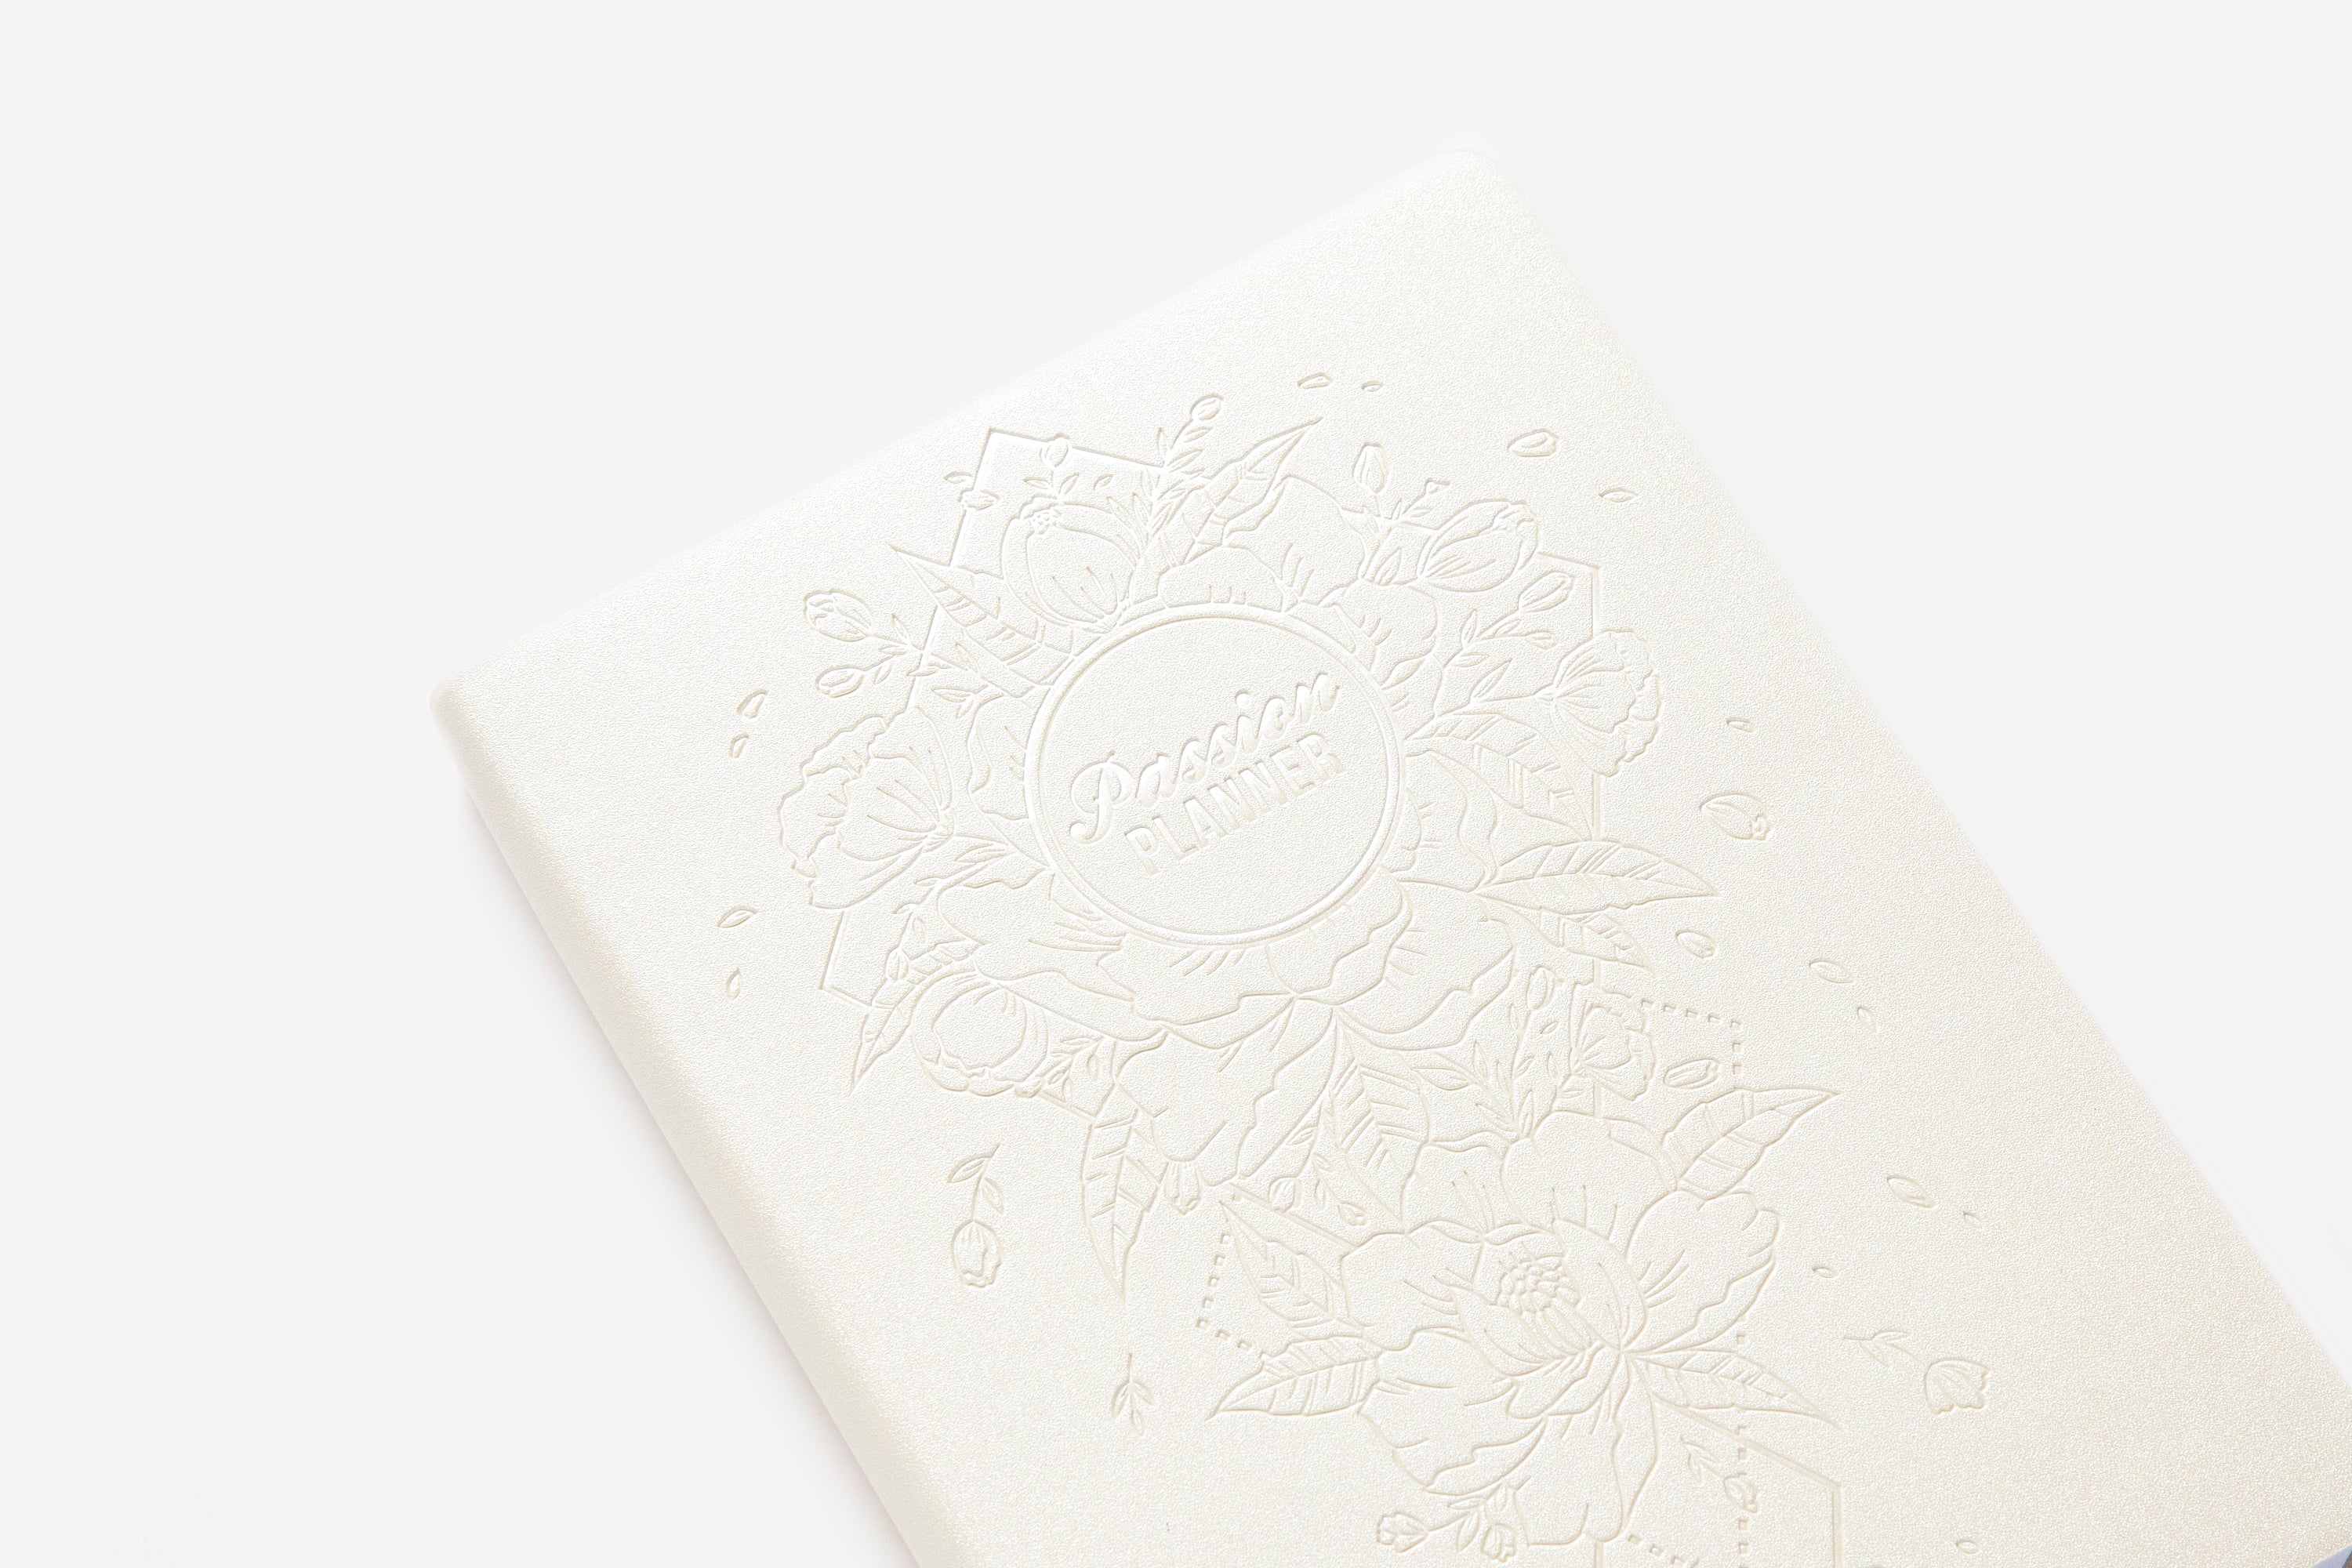 Daily Undated Blossom White - Passion Planner